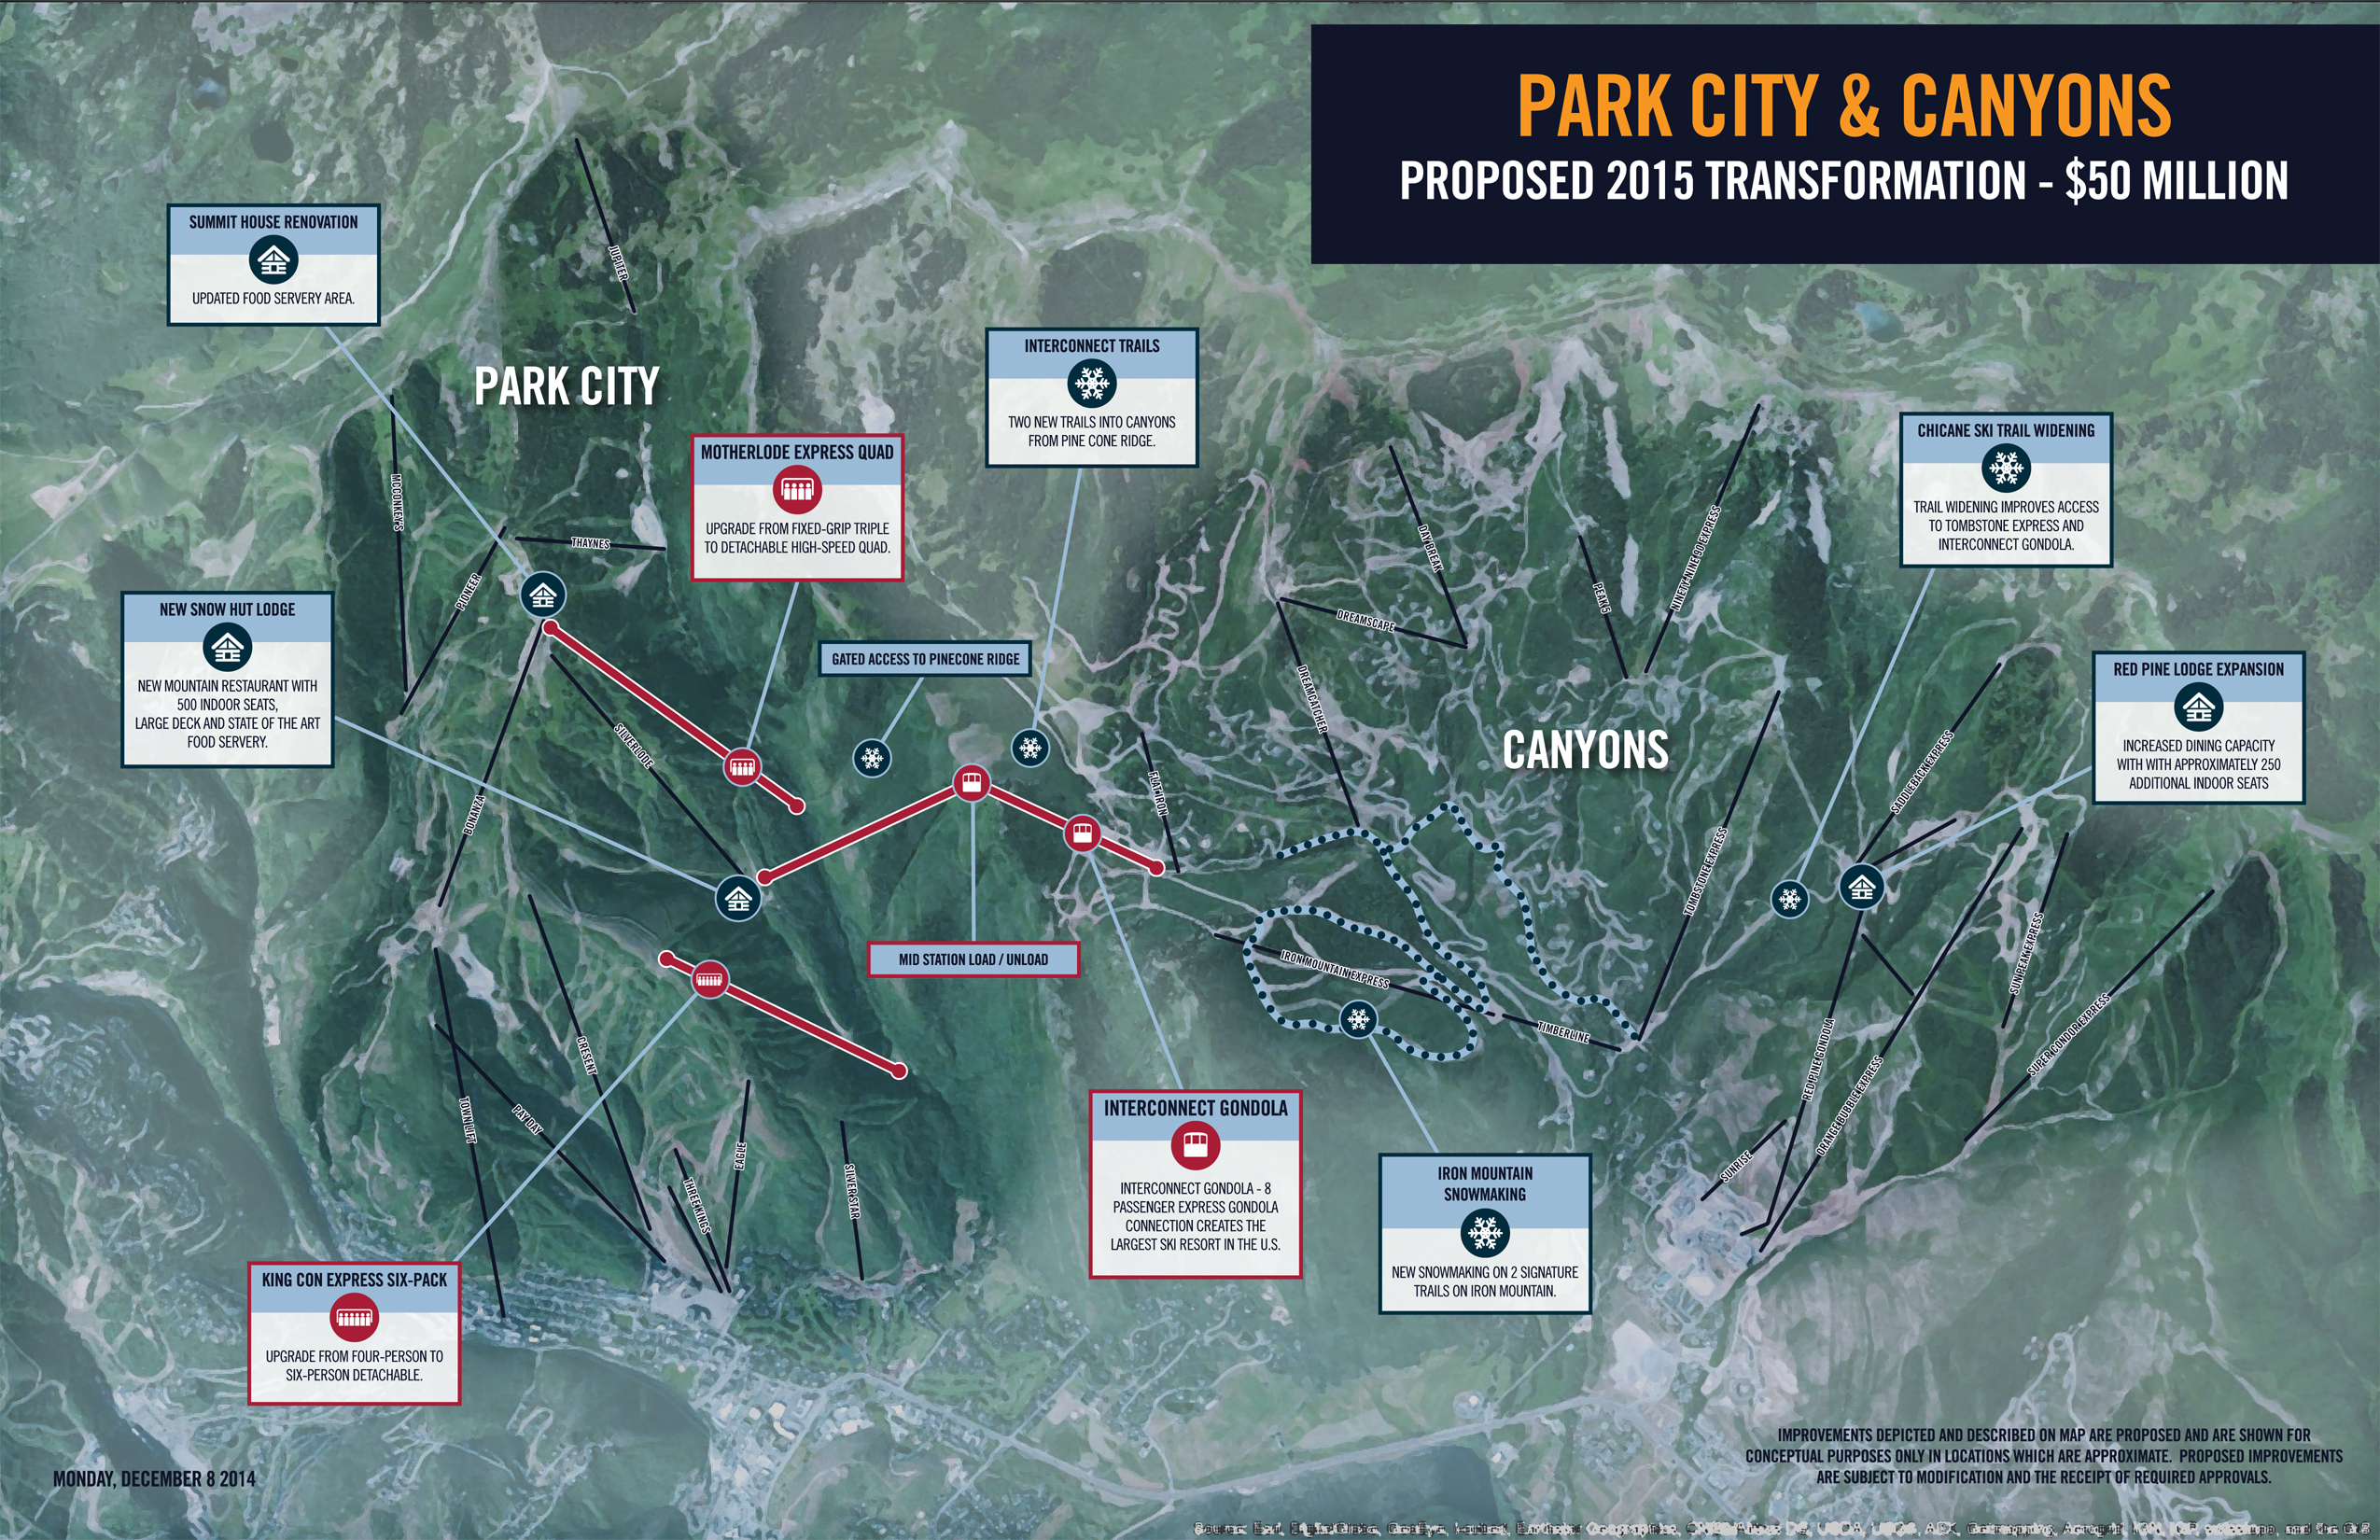 A map of Park City Mountain Resort and Canyons with Vail's proposed resort connection with a new gondola, as well as lodge and ski run improvements. (Image: Vail Resorts)